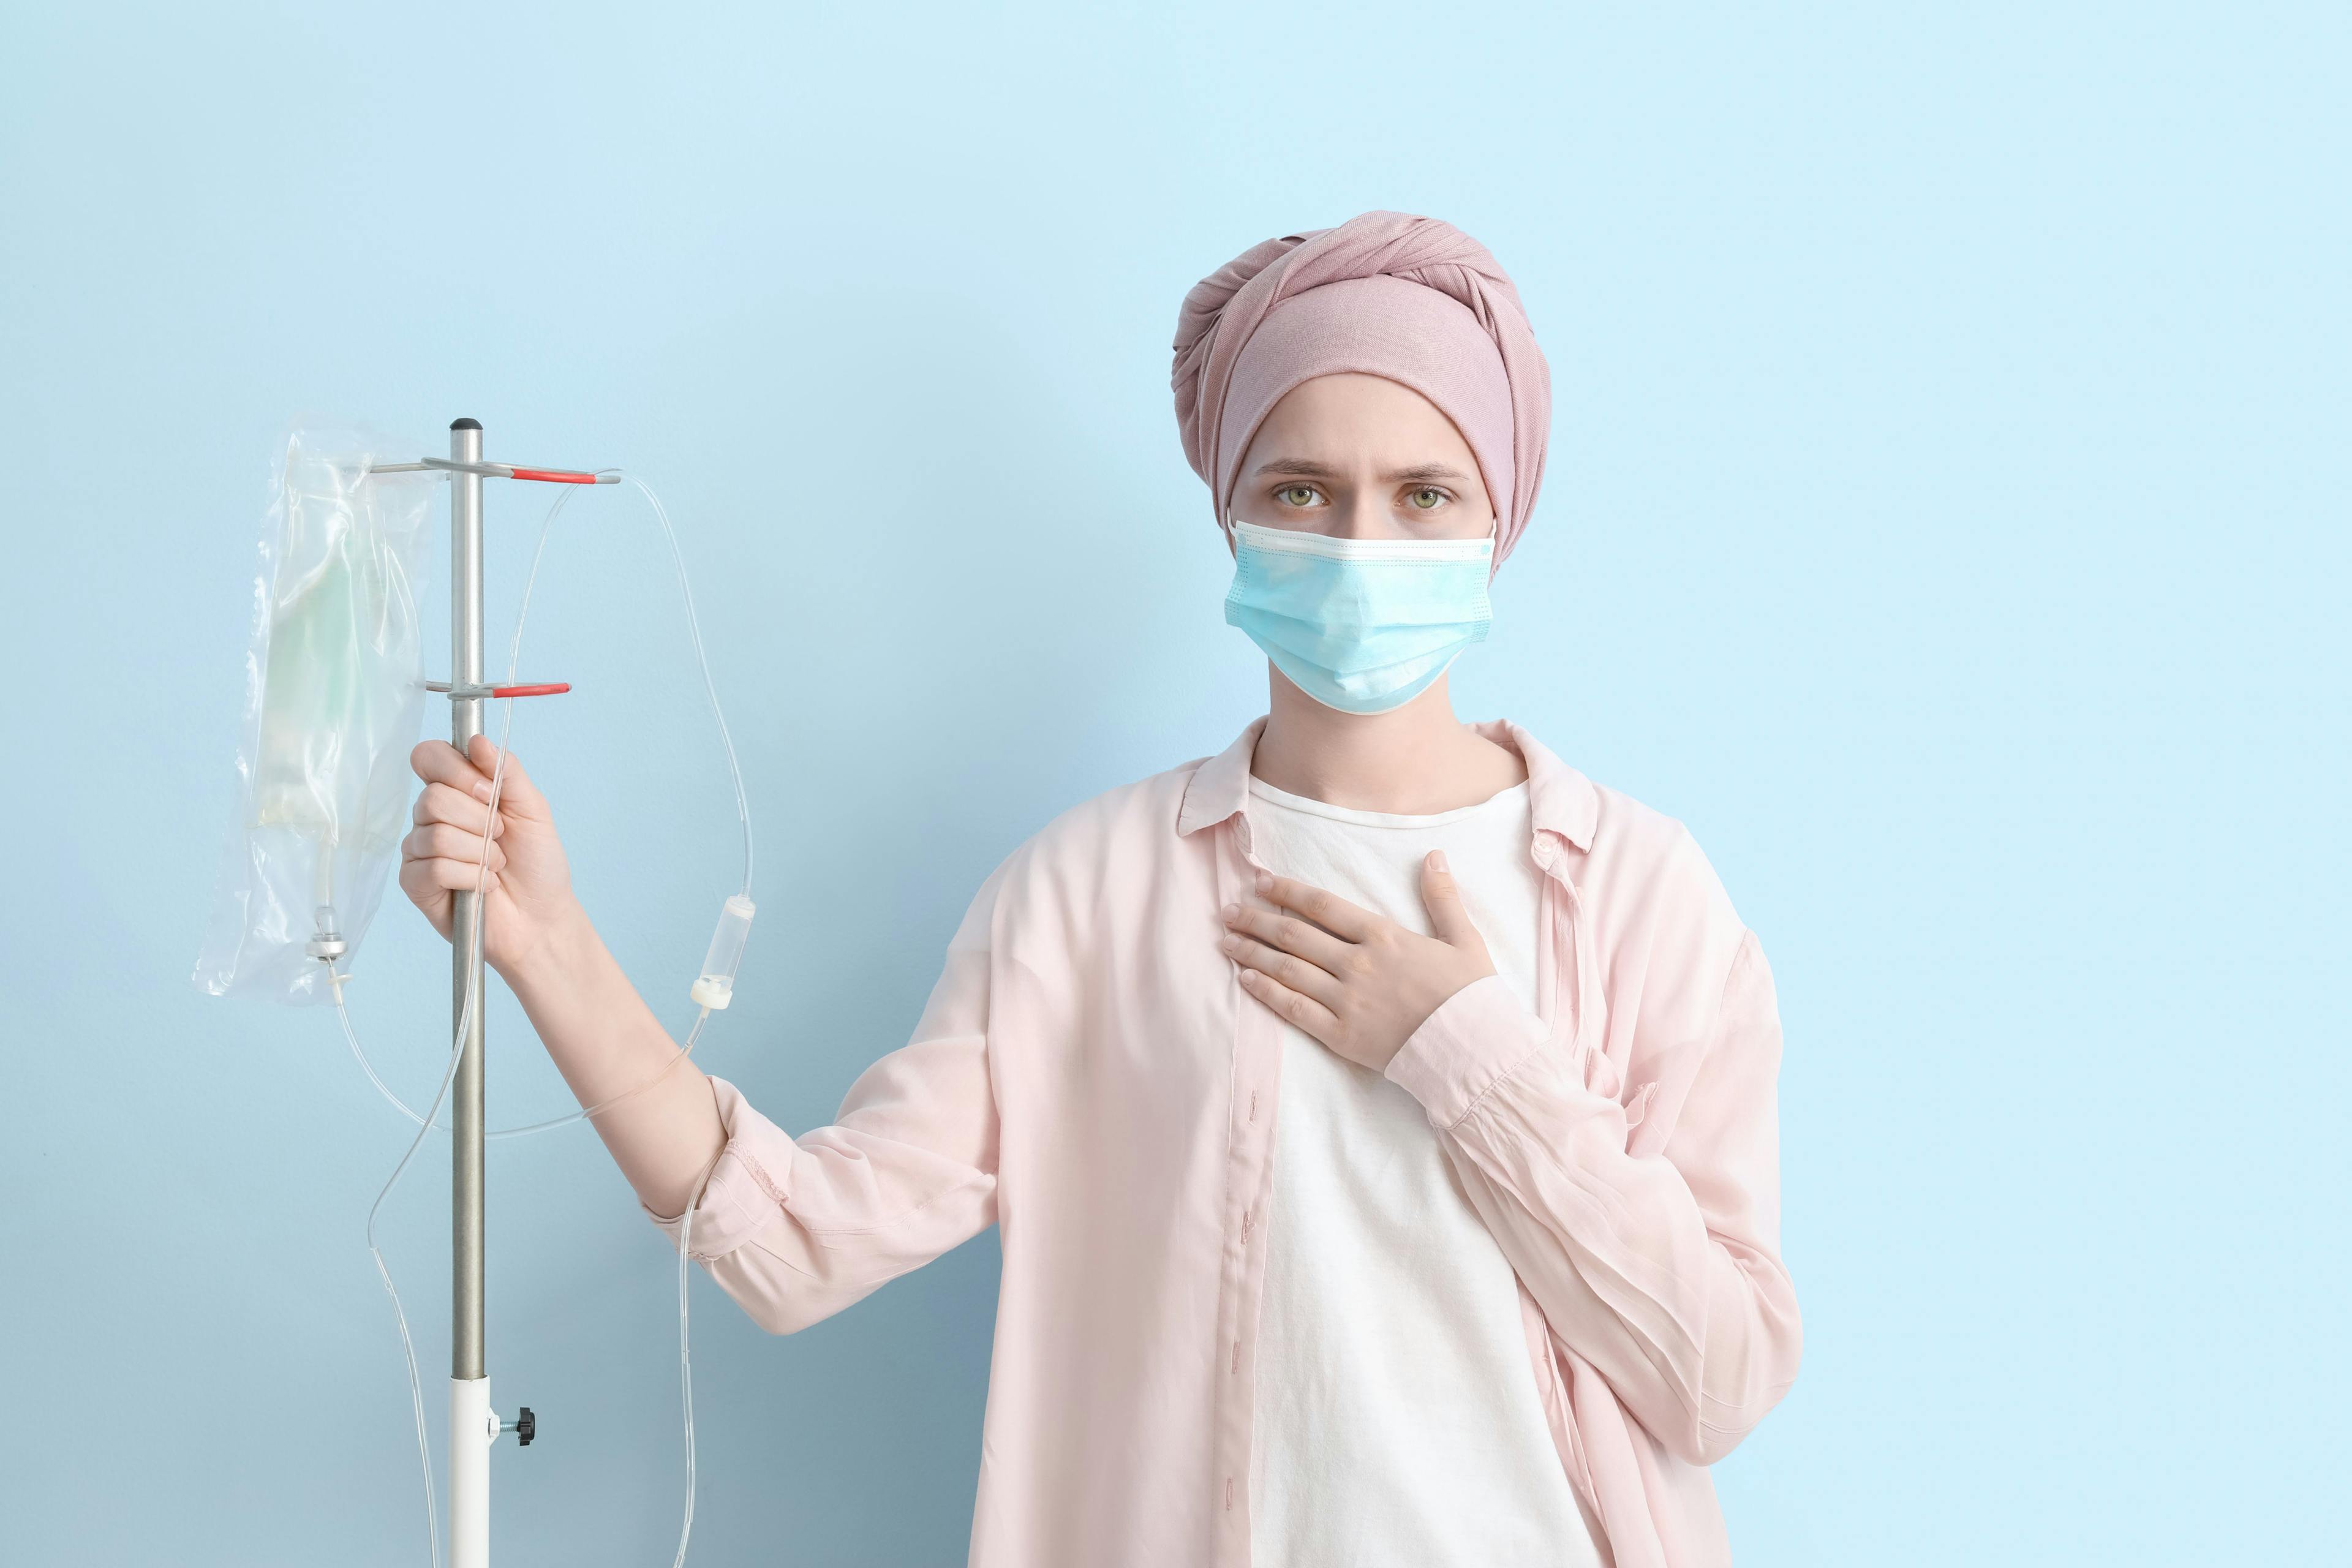 Woman undergoing cancer therapy wearing surgical mask | Image Credit: Pixel-Shot - stock.adobe.com